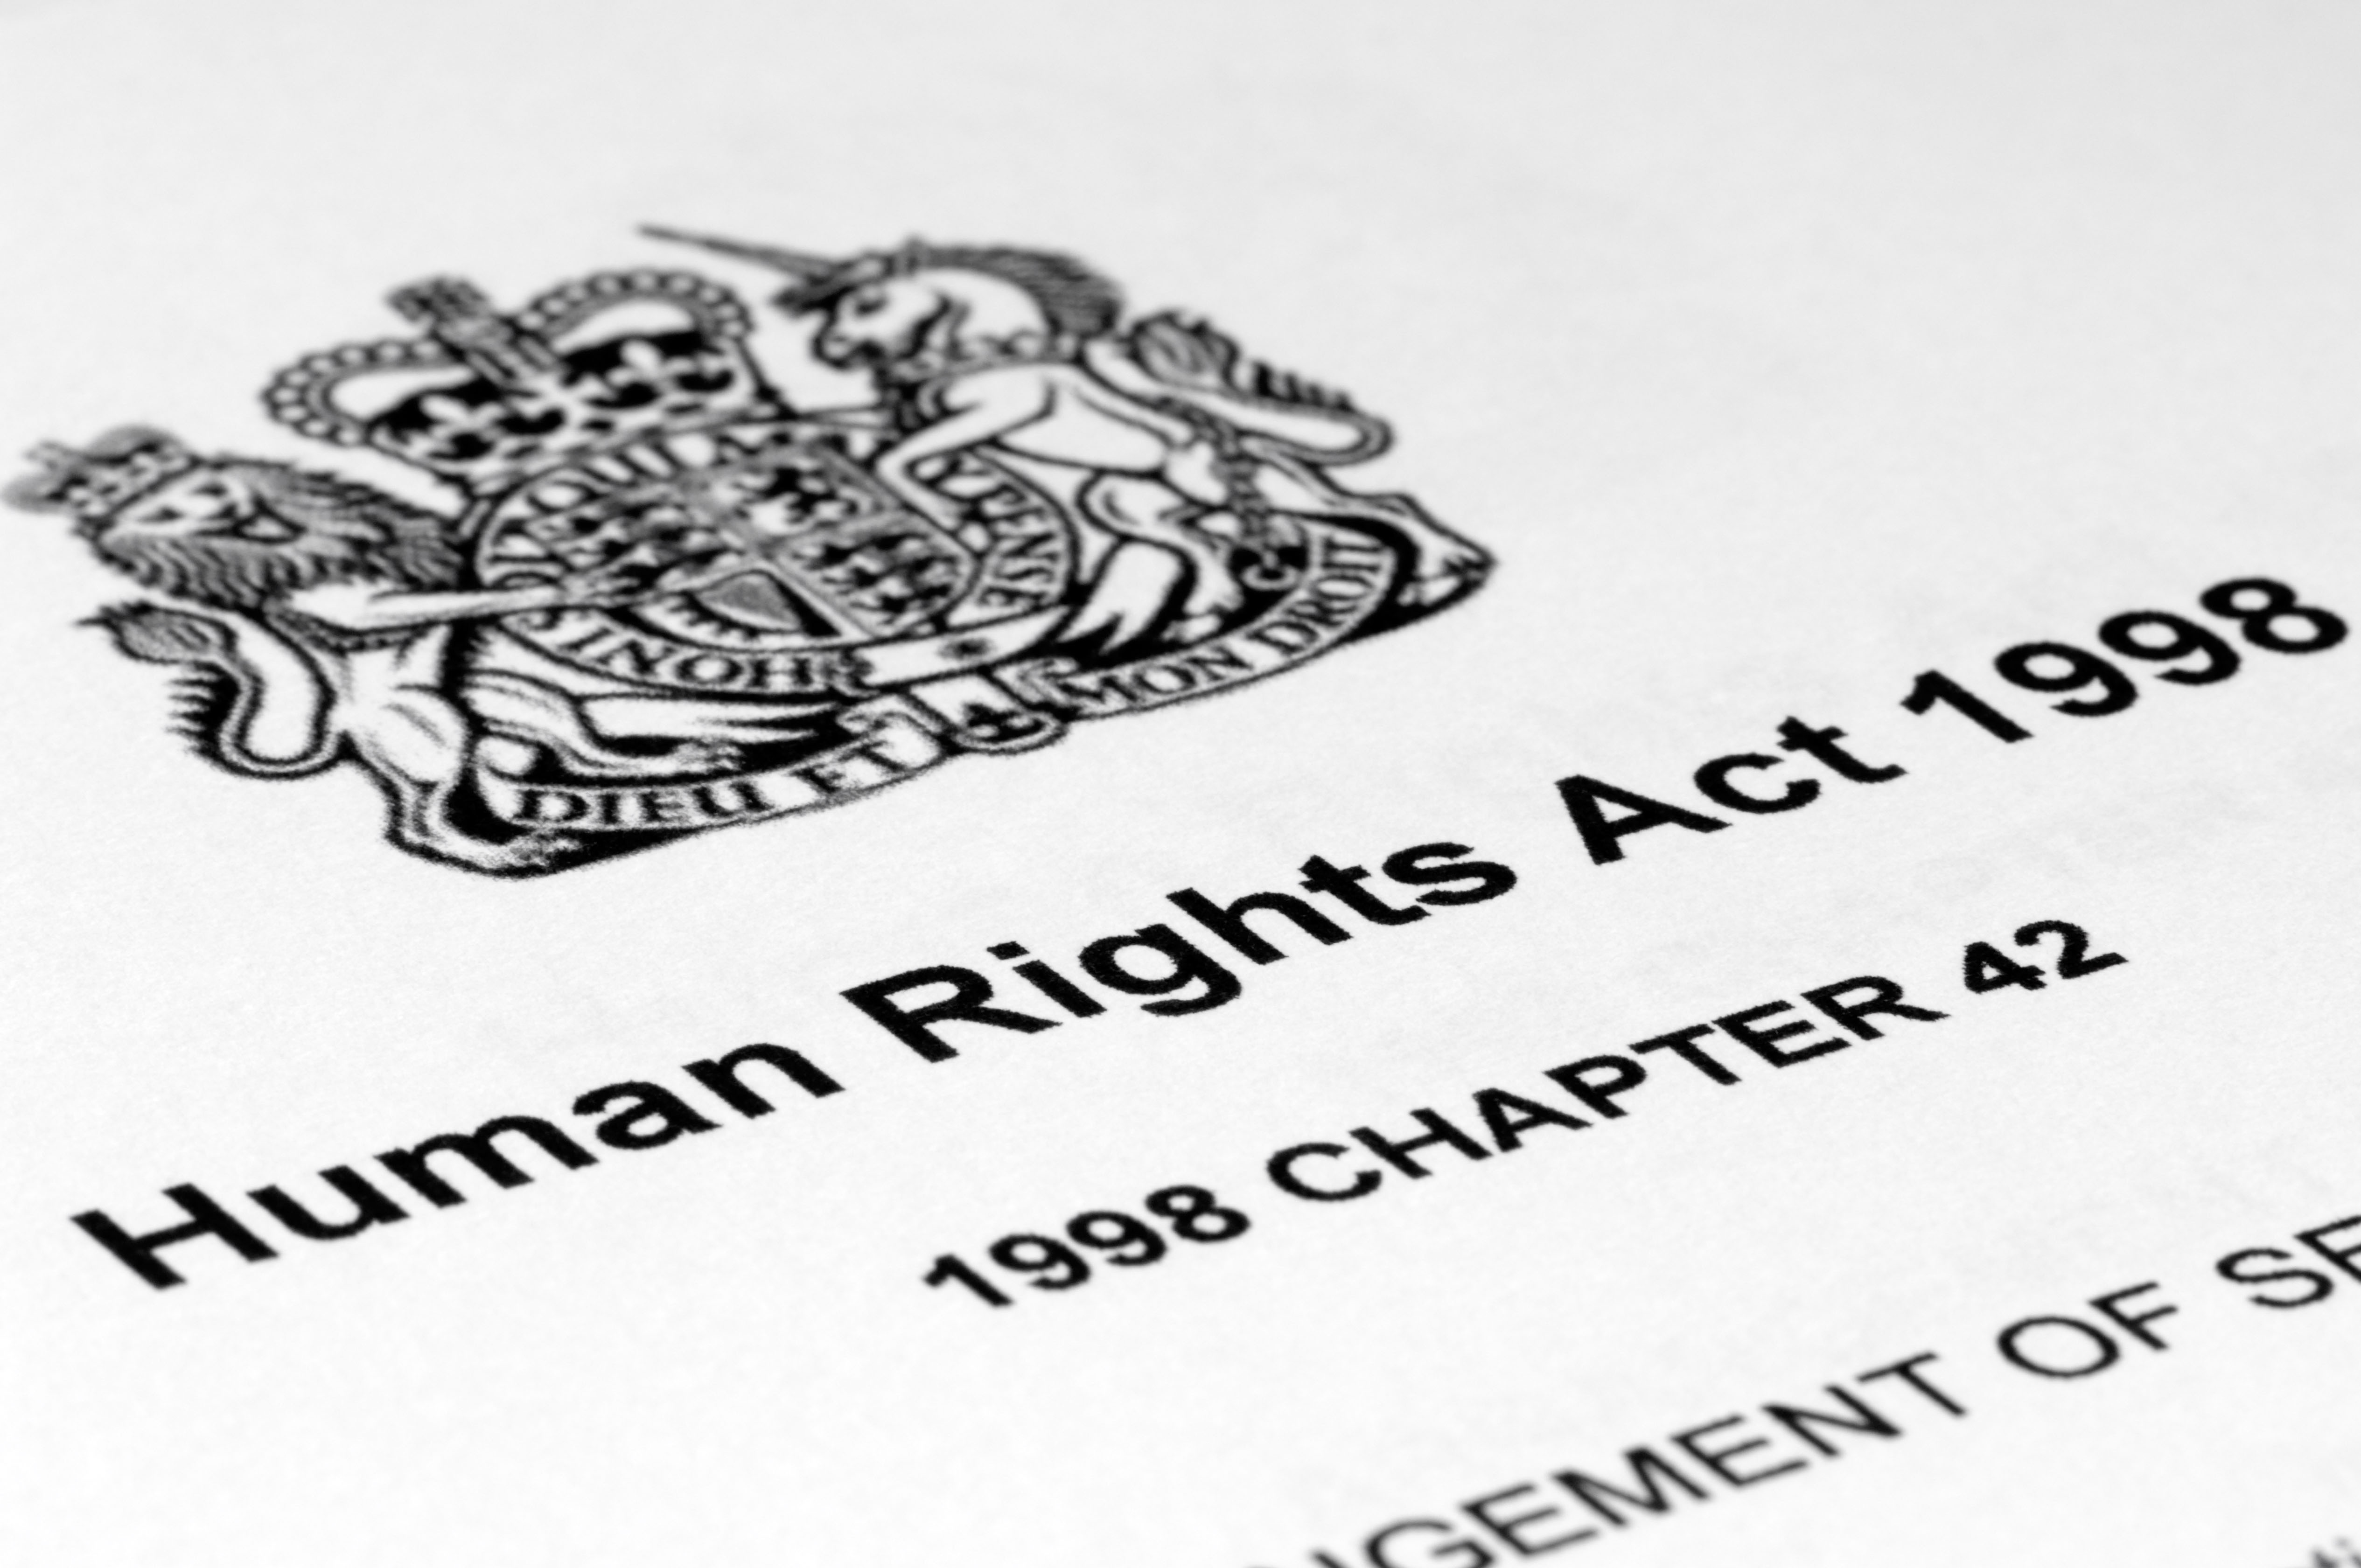 The UK Human Rights Act 1998